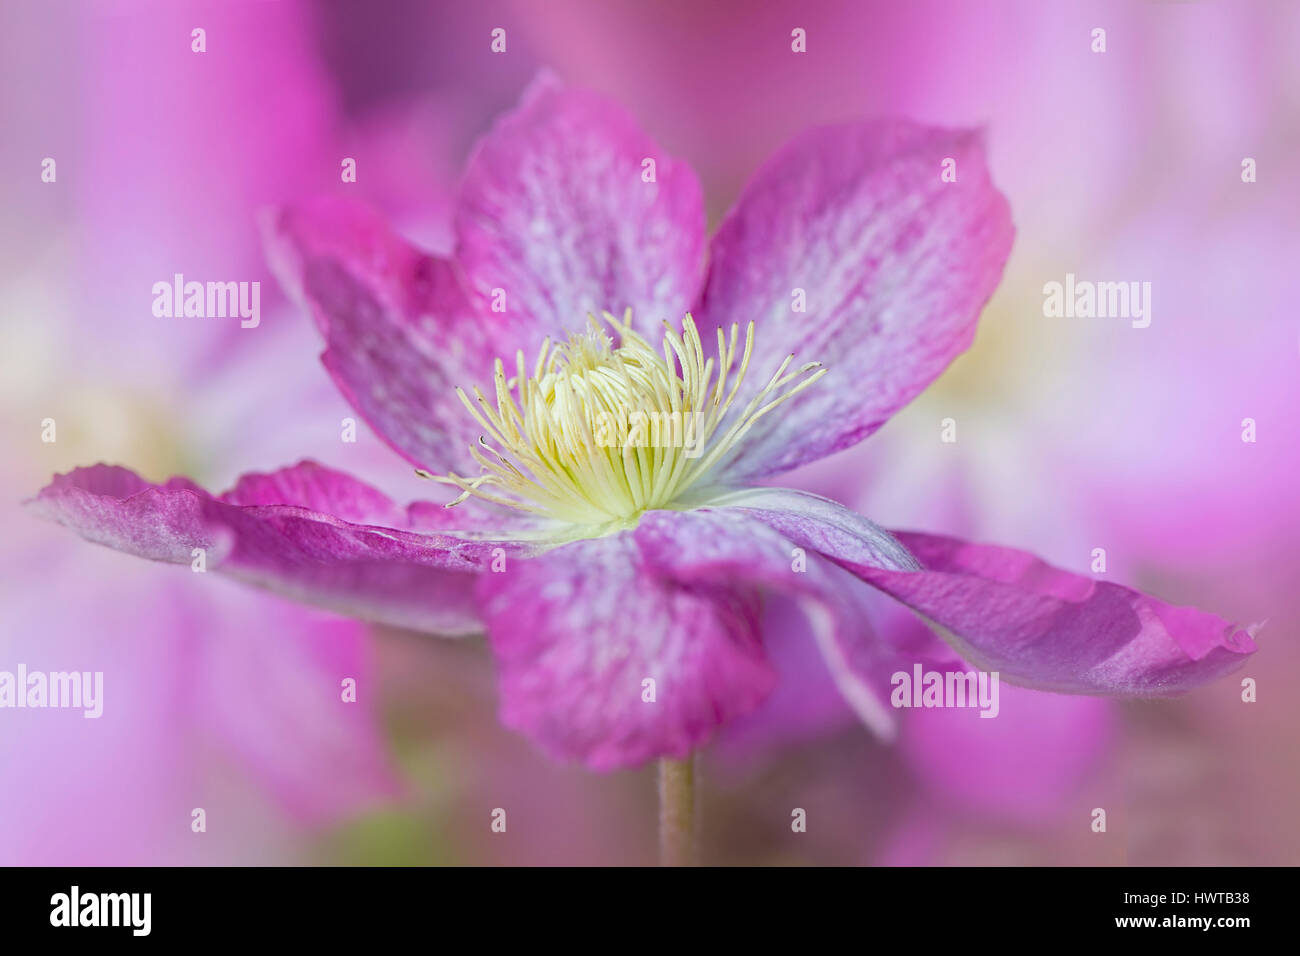 Close-up, creative image of the beautiful pink flower of Clematis Piilu, image taken against a soft background. Stock Photo